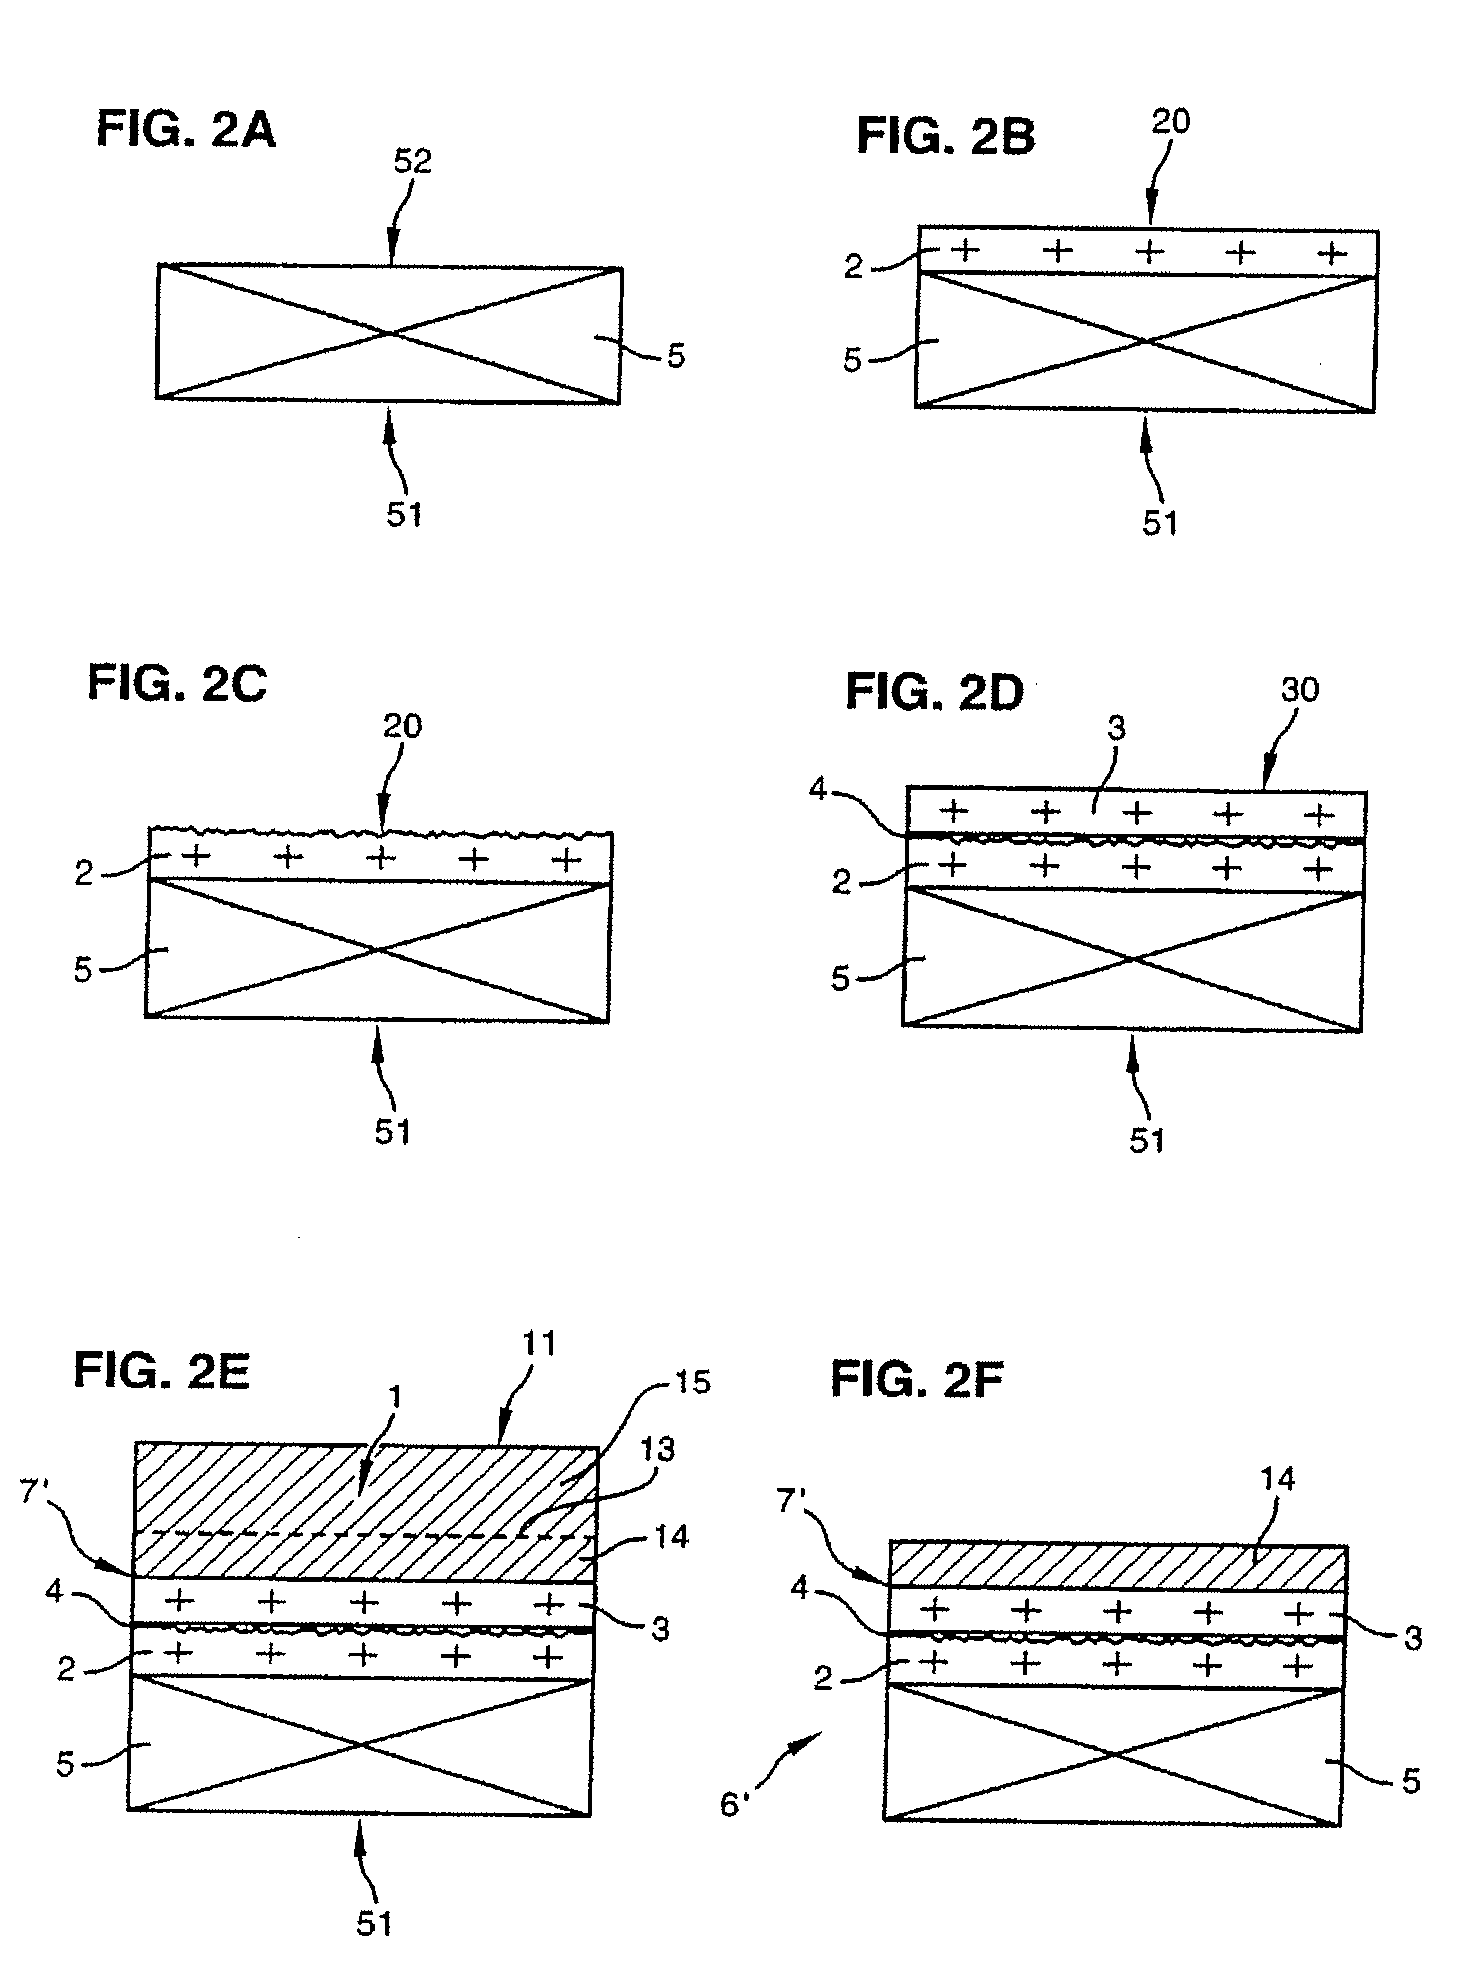 Fabrication of hybrid substrate with defect trapping zone